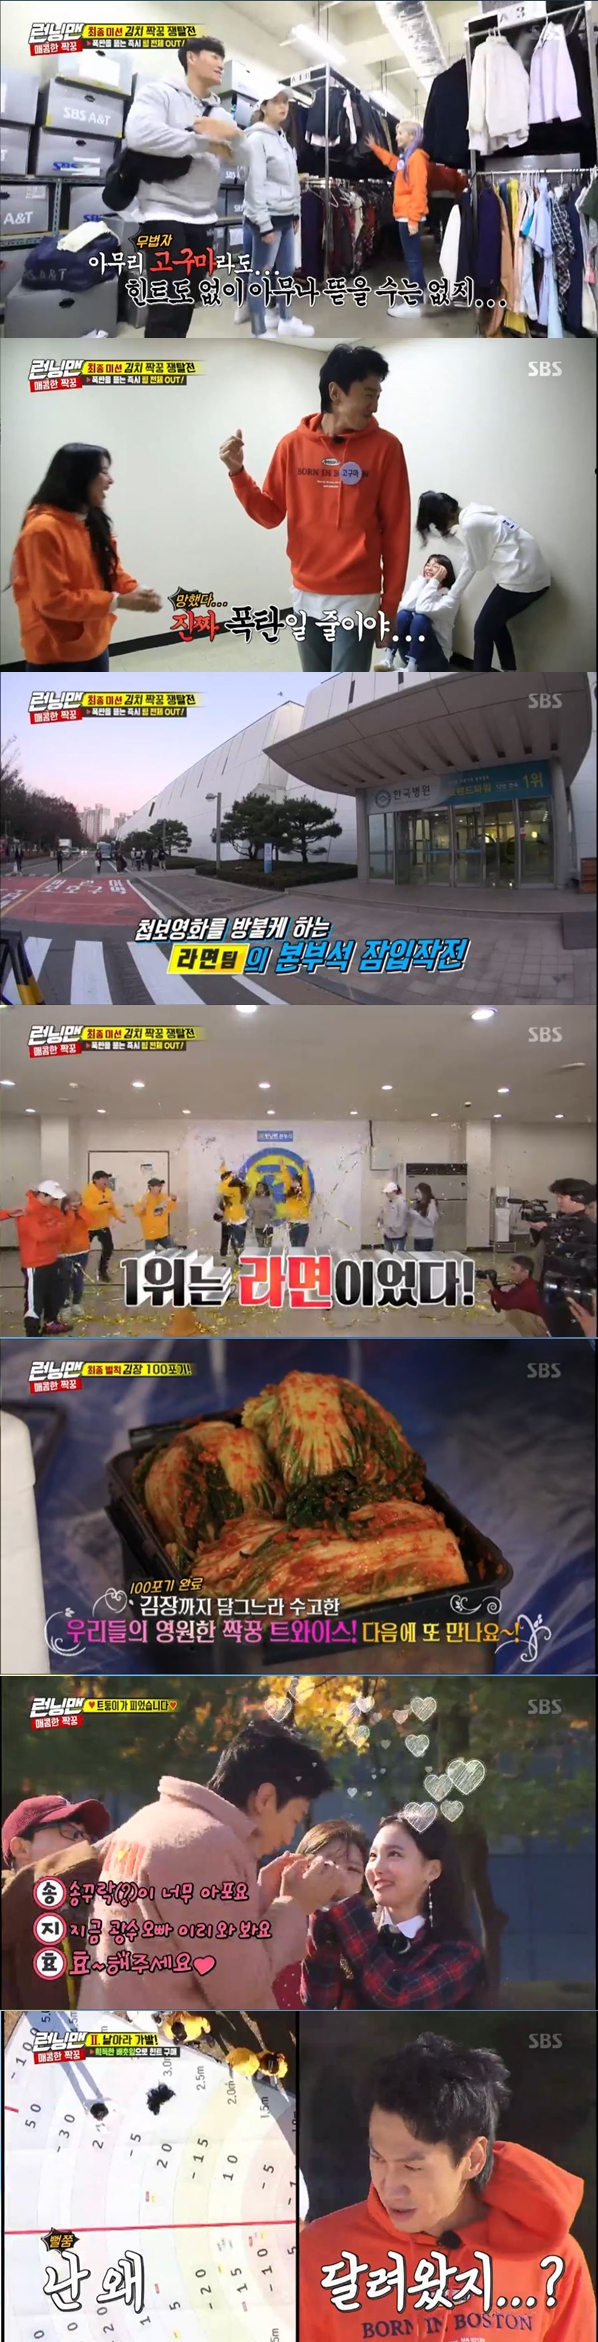 <p>If a team won a victory.</p><p>2 days afternoon broadcast SBS TV Running Manin the TWICE former member appeared as a guest to the members and spicy paired peek-a-Boolace together.</p><p>Running Man Official sister group TWICE has appeared from the South the other active. Come early re-locate TWICE to Yoo Jae-Suk I have come to sometimes wait, but tremendous plays had,said her they was welcome. I Smoking last appeared at the topic I was to school the upgrade version.</p><p>She is Song JI Hyo presented as send down finger hurts, now mineral water brother-more, please,the complete Lee Kwang-soo have to nail the spirit car. This past appeared in your dance as the topic I was to be the expression is this time and leave uncledance by the members satisfied.</p><p>Authentic lace on the front in team configuration..... TWICE appeared before the members kimchi bar, select the four teams were divided into. TWICE members also thought that the kimchi and the best food to chose, and Lee Kwang-soo and JI Suk Jin that potato team, and we also do not two people are disappointed by could not hide. Eventually top the rice with the steam from the rocks in the fill pool,or with a voluntary choice for the expression potato as a team and 5 man team.</p><p>The team is configured and the first The Game in Lee Kwang-soo by of the active. First The Game is The iron bar to the back legs land, The Game was. Round the iron rod, the height of which was lowered, and Yoo Jae-Suk is the turn of easy in front of the obstacle, not back to try for success. The following turn, Lee Kwang-soo arrived nicely back to tried, but the main part is the iron rod hanging on a big smile to me. The Game from each team in the last week as the lines for dinner were unsuccessful, but Kim Jong Kook lightly success to the training team No. 1 were injured as the focal leaf 30 received.</p><p>This retort in missions, Lee Kwang-soo is actually active to the sweet potato team is 40 times the focal leaf. Retort to one is to eat in the mission in the last Kim Jong Kook and Lee Kwang-soo is left, and Kim Jong Kook timeout as failed, but Lee Kwang-soo is the face of the great woven eat lead your team to victory. Last The Game a pig-wrestling in one of the active with the academic team to win the early 3 Game in get hints learn meanwhile leaves most of the acquired team training team were.</p><p>Round 2 The Game is The wig-for-exchange. Lee Kwang-soo is The Game to start before the driller and many times the focal leaf for obtaining of showed. The sweet potato team is Lee Kwang-soo challenges before already 70 obtained. But Lee Kwang-soo is a driller that-compared to 5 points for the embarrassing situation he has directed. Each team is placed the focal petals into the survey for the hint to acquired 1 as a potent food is ramen.</p><p>Final place 1 place team name tag when seen from bringing. Potato team, Lee Kwang-soo, JI Suk Jin, Hyun, Mina, Chae is the # 1 likely to be low in comfort in the race at random. Every teams goal if it was, each team as a menu, and a bomb to the moon member and can start a fight.</p><p>Rice team the power out. Rice team and each team is 1 for the menu will not be convinced that an Alliance was. But Lee Kwang-soo is on place peoples name tags off, tried to, in a small village and Lee Kwang-soos name tag off. But Lee Kwang-soo is a bomb it was. Alliance is 5 minutes, but the Rice team is the power out was.</p><p>The final winning team is called the team. Kimchi and the best menu, 1st place for ramen, Ramen team until the end if kept. In the last headquarters in burrowed potato team because the crisis came, but Stones with a bomb amount and more as to follow the wind in the ramen team to win the final one. Penalties Kim 100 give a Rice team that was.</p>